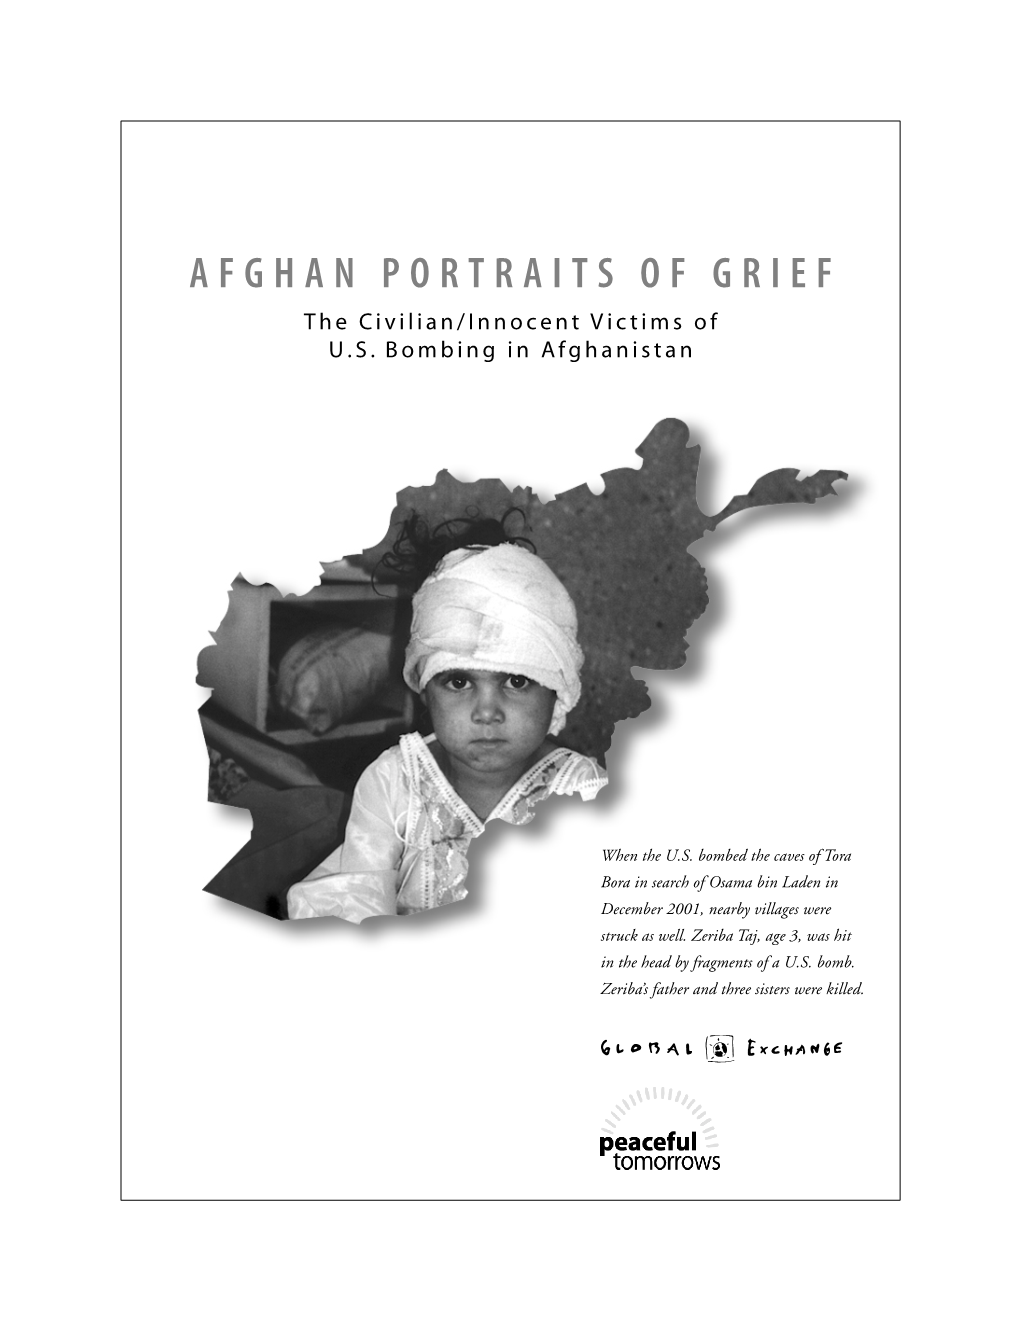 Afghan Portraits of Grief (2002)